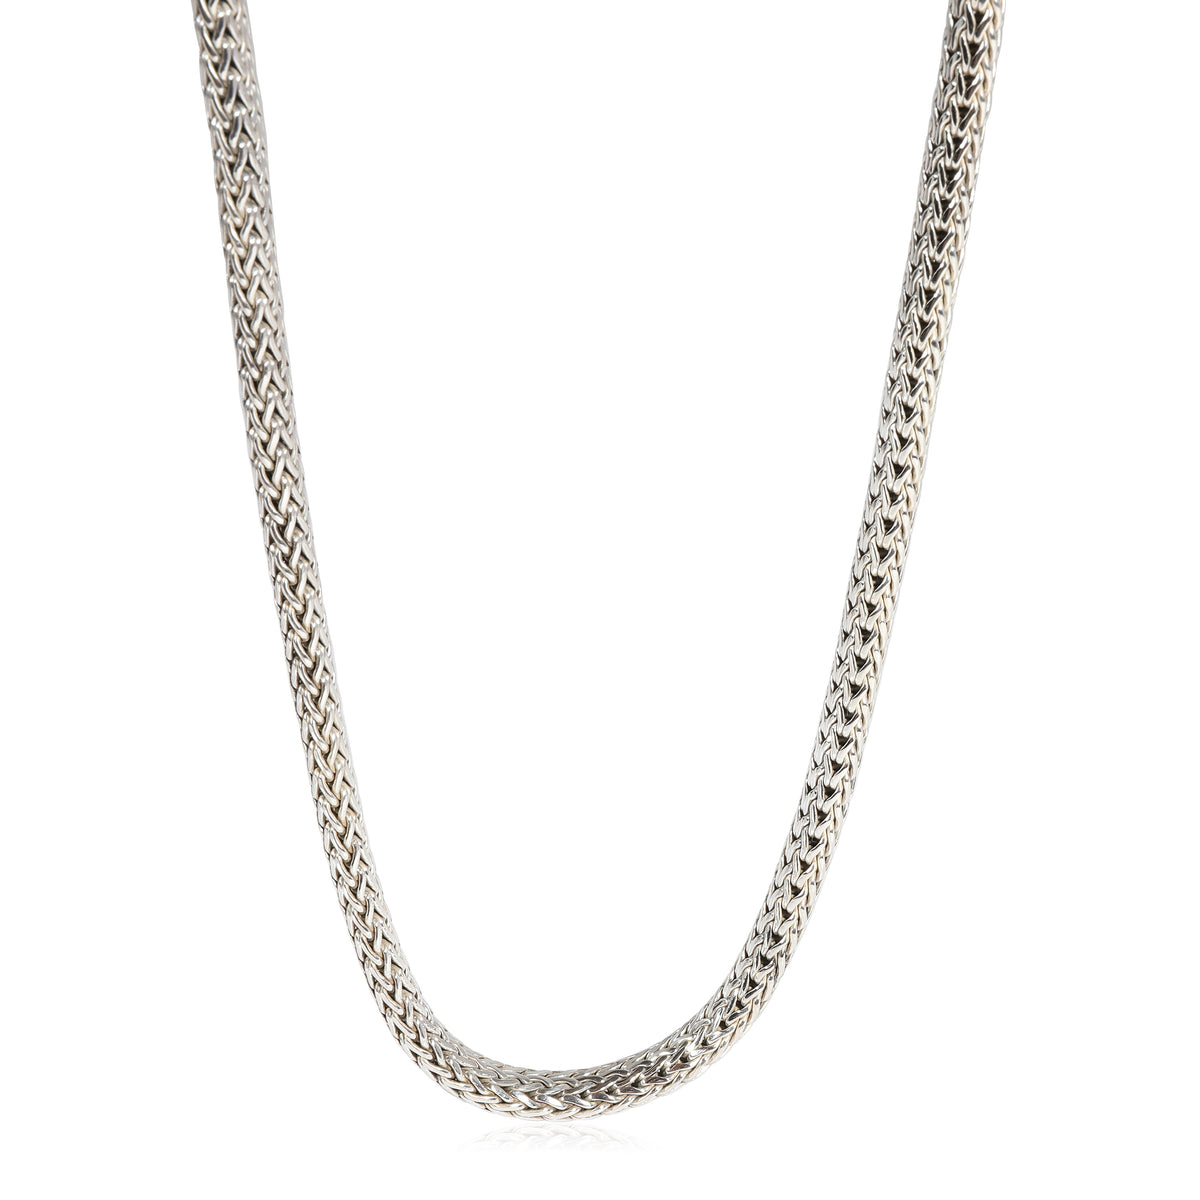 John Hardy Classic Chain Necklace in Sterling Silver